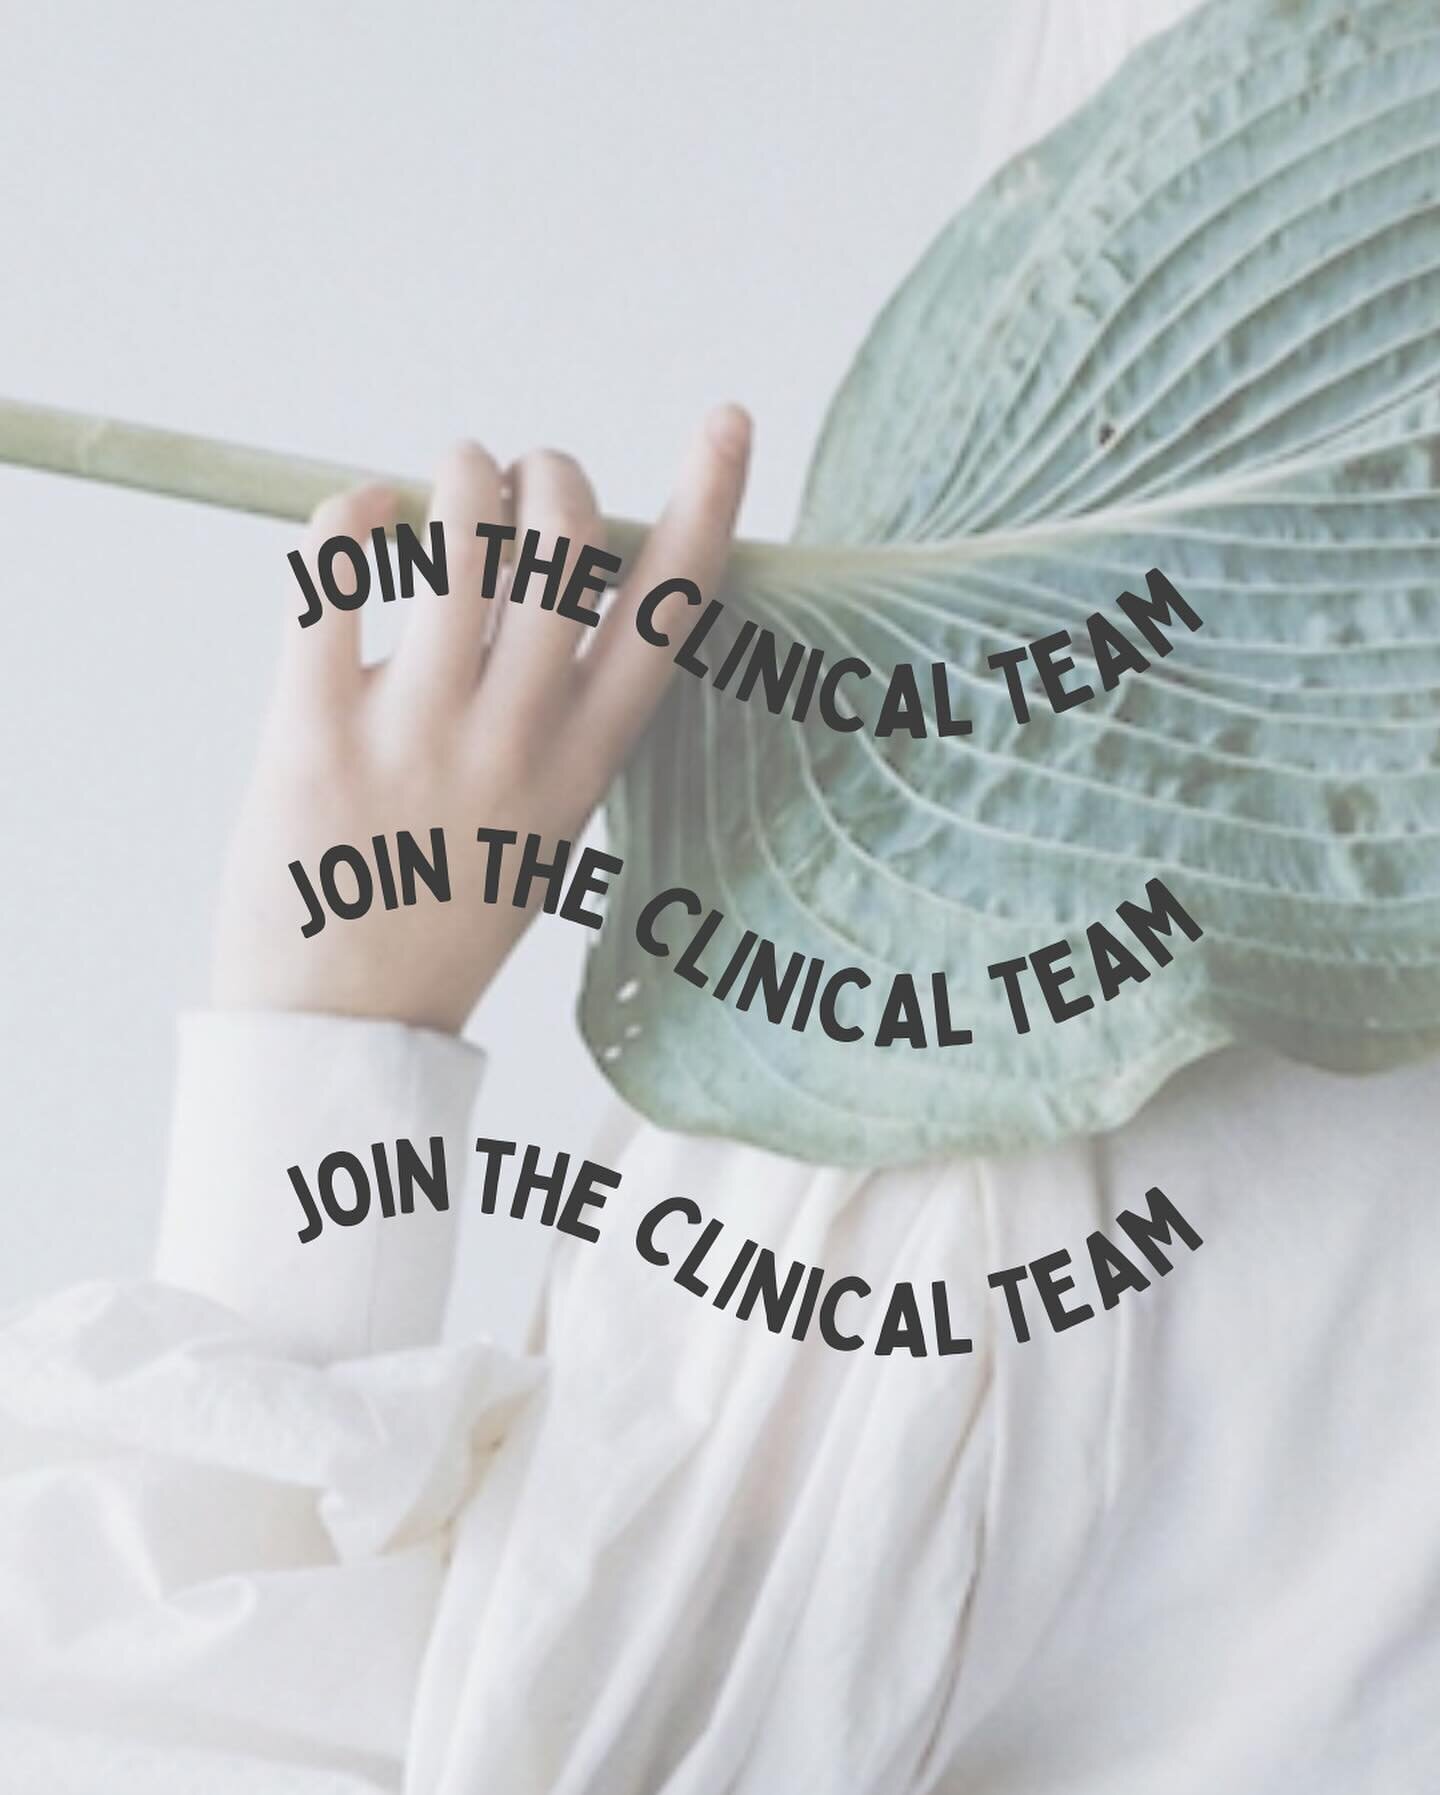 Join our Team! We are looking for a mastered level clinician who can help us support more people. We are a modernized and innovative therapy practice seeking authentic and skilled therapists.

Interested? We would love to hear from you. Email your CV